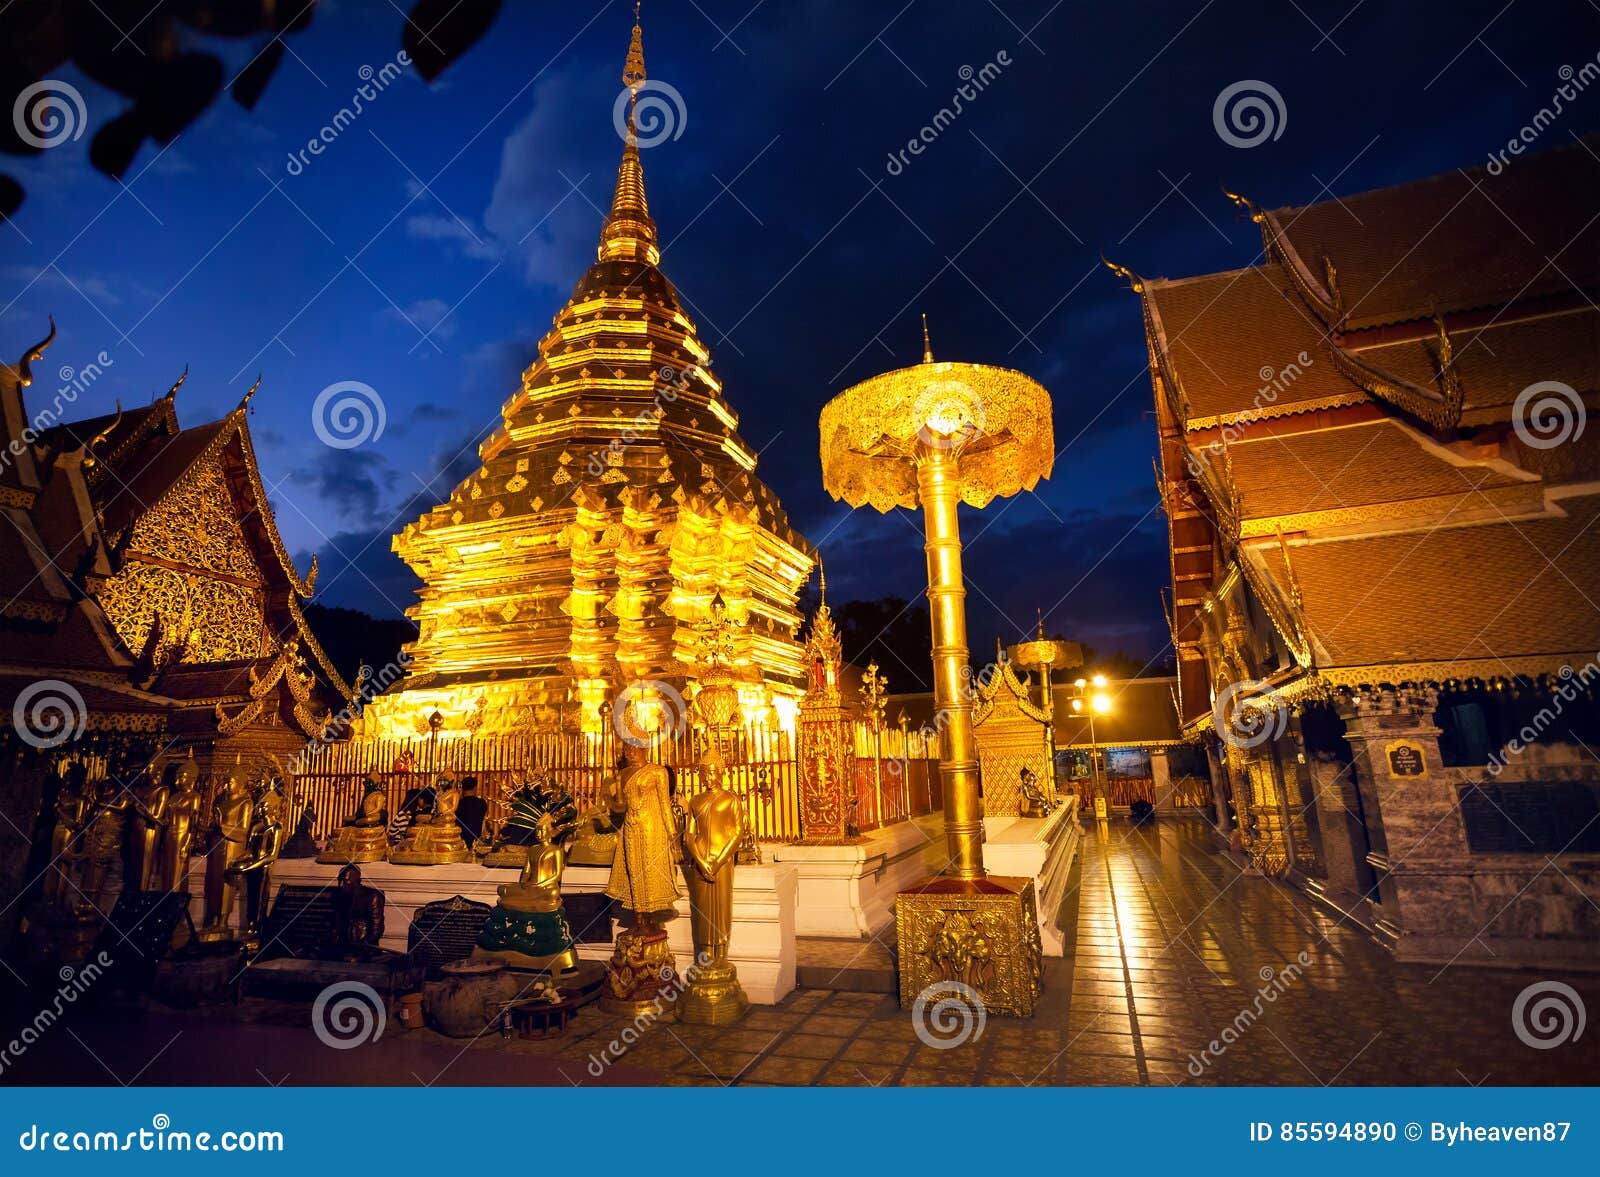 buddhist temple at night sky in thailand